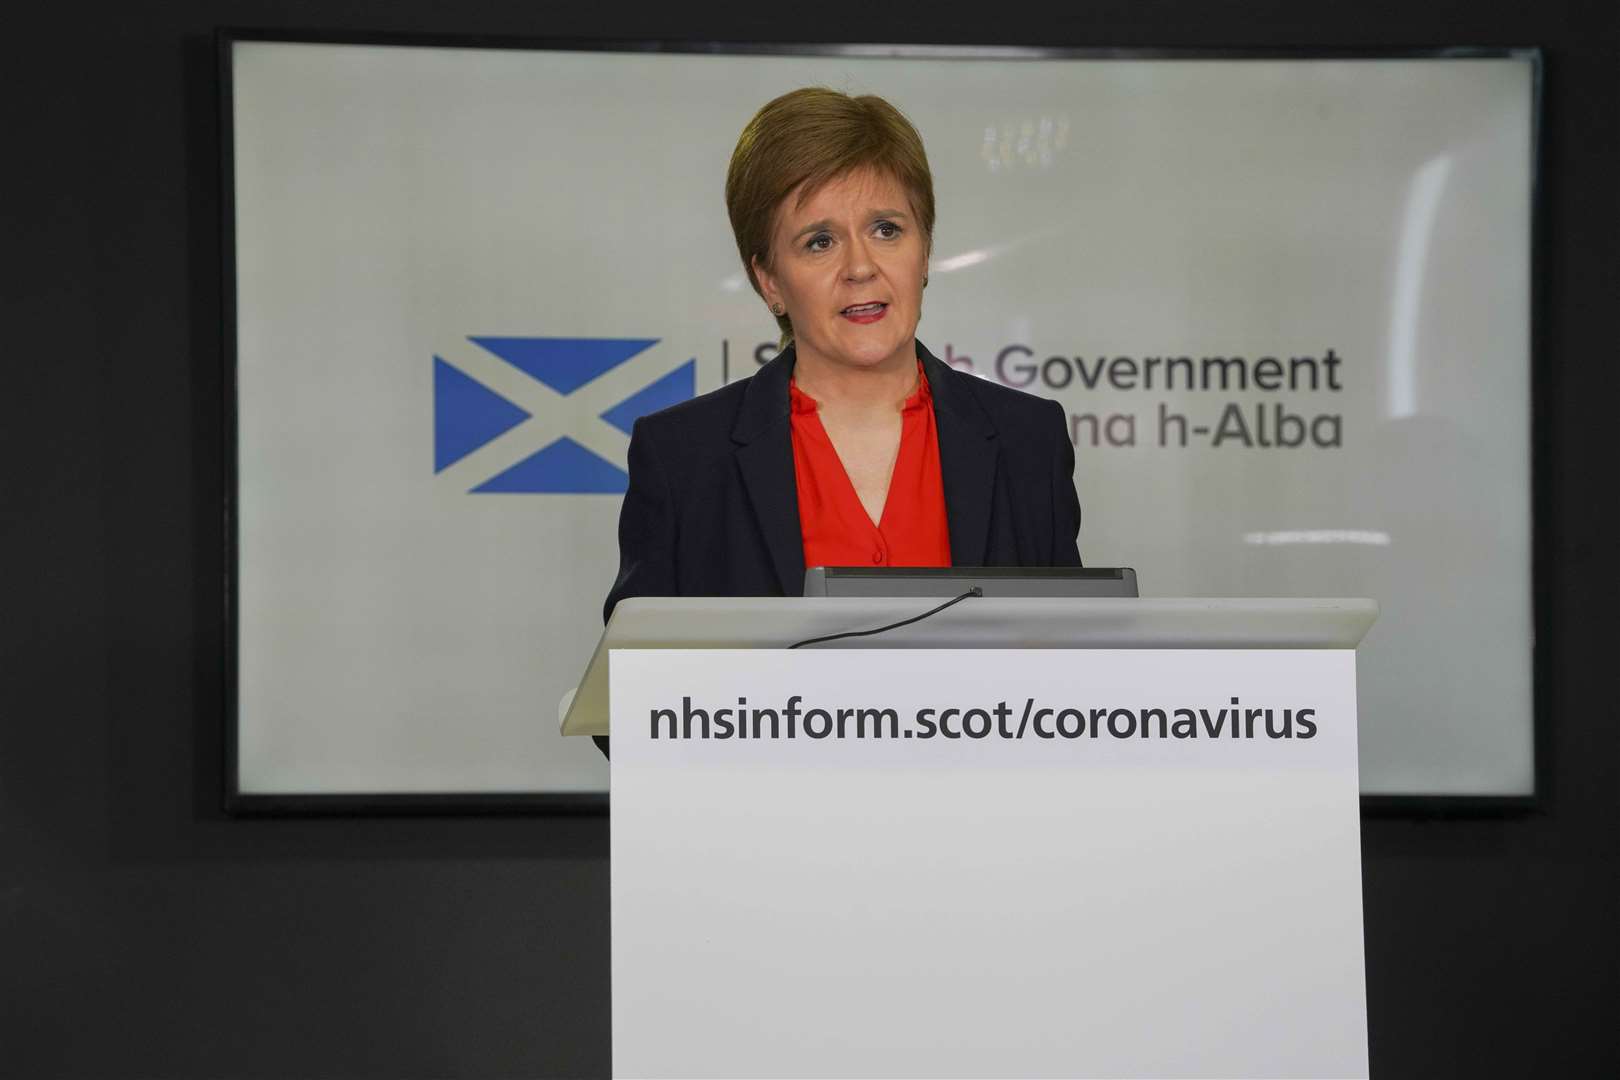 Scottish Government COVID-19 press conference at St. Andrew's House, Edinburgh with the First Minister, Nicola Sturgeon, Justice Secretary Humza Yousaf and National Clinical Director, Professor Jason Leitch..